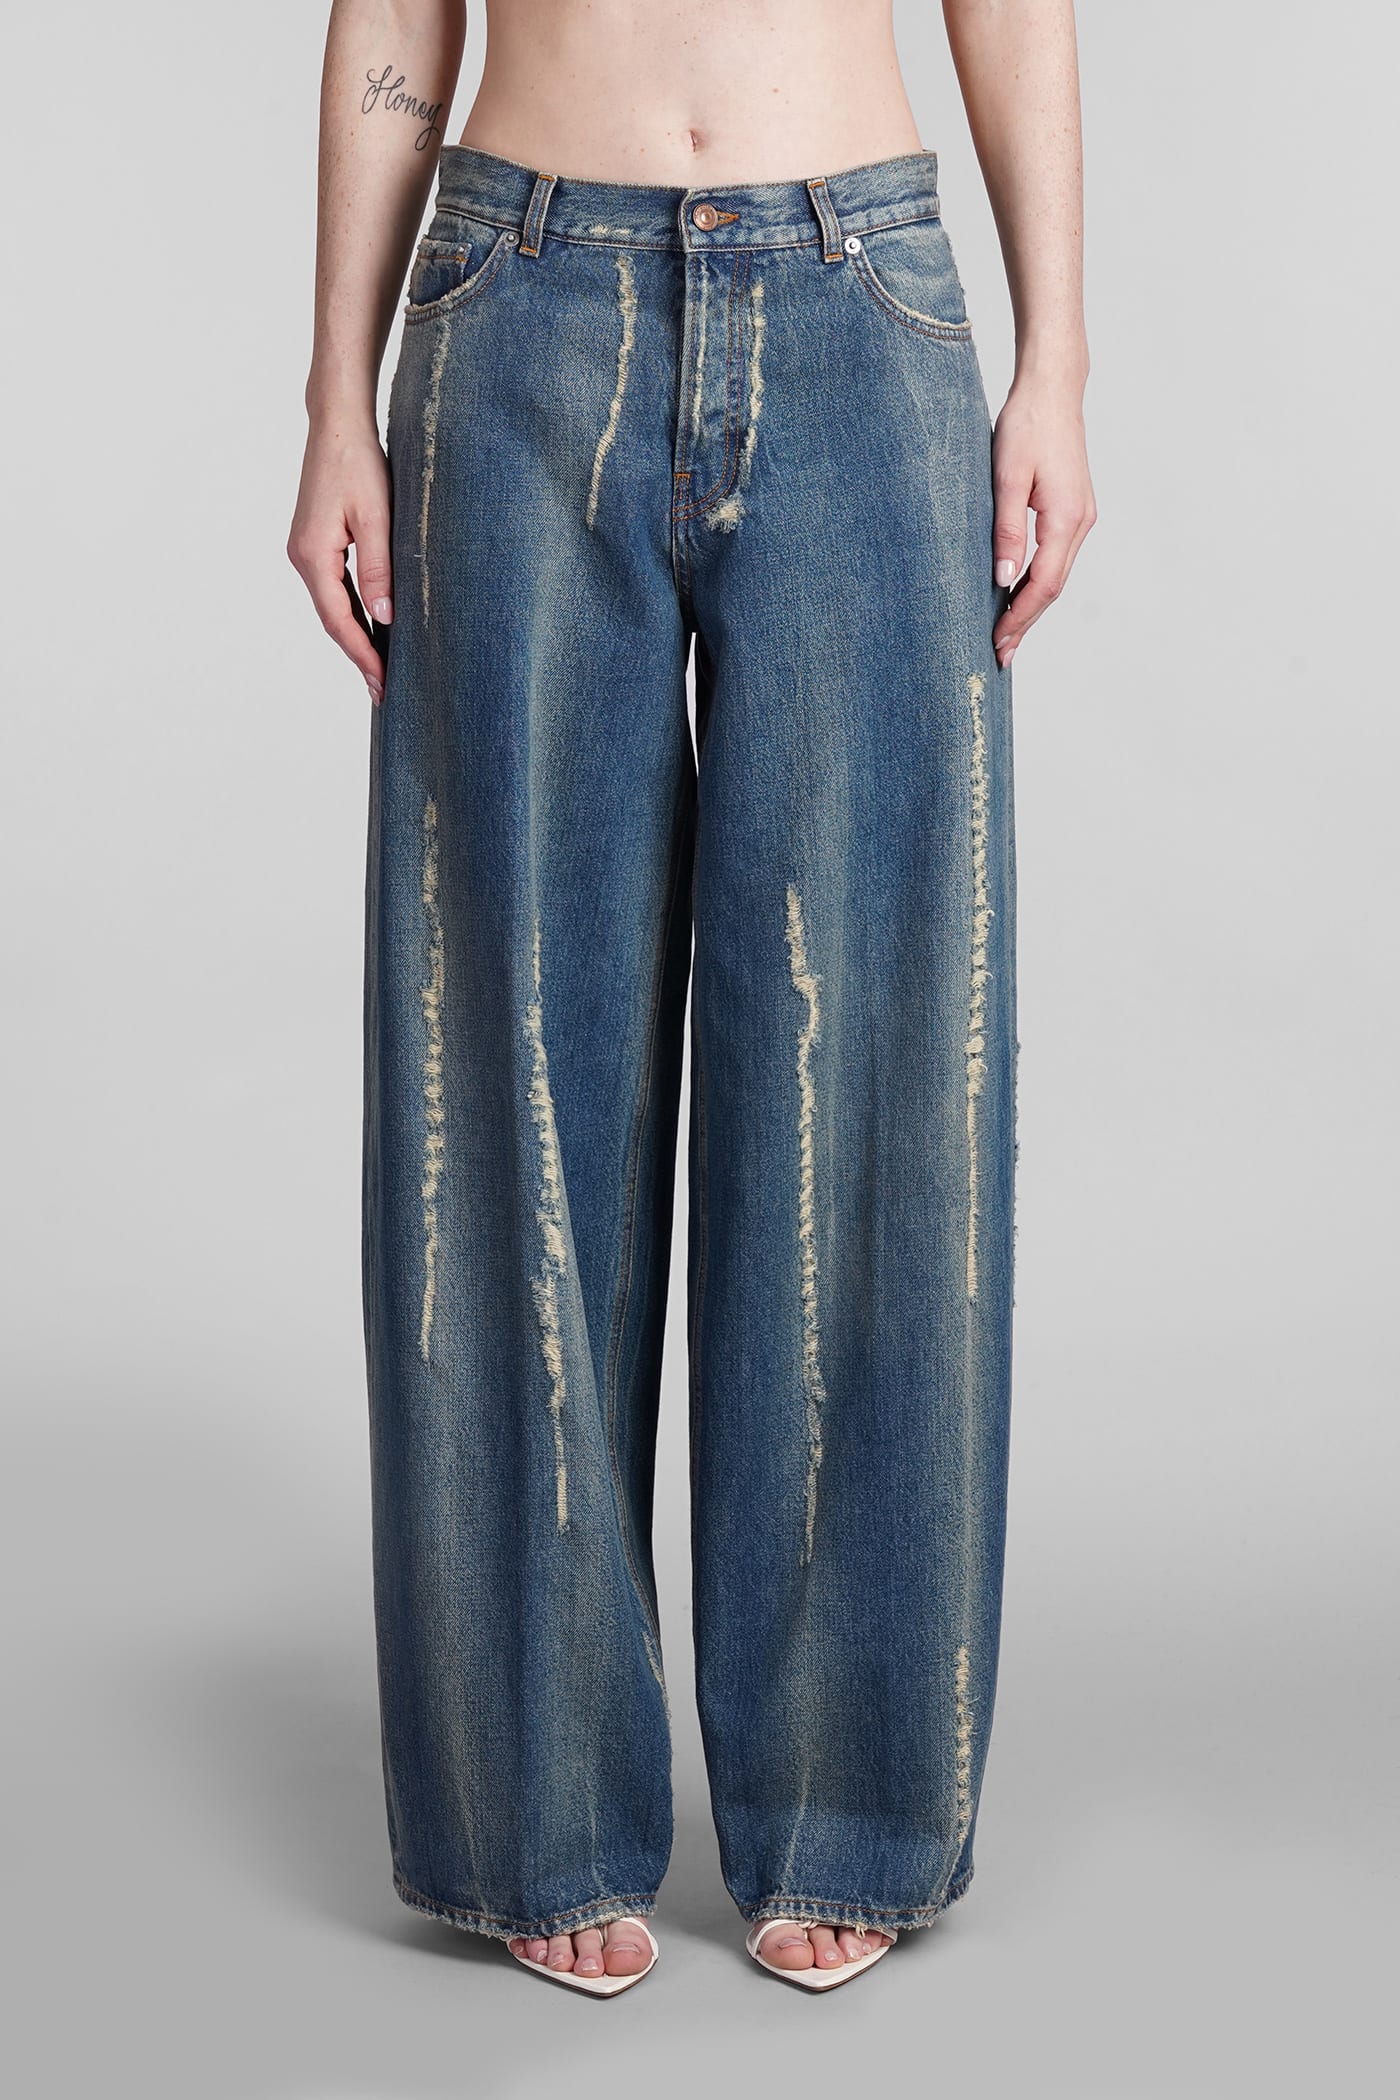 Bethany Jeans In Blue Cotton